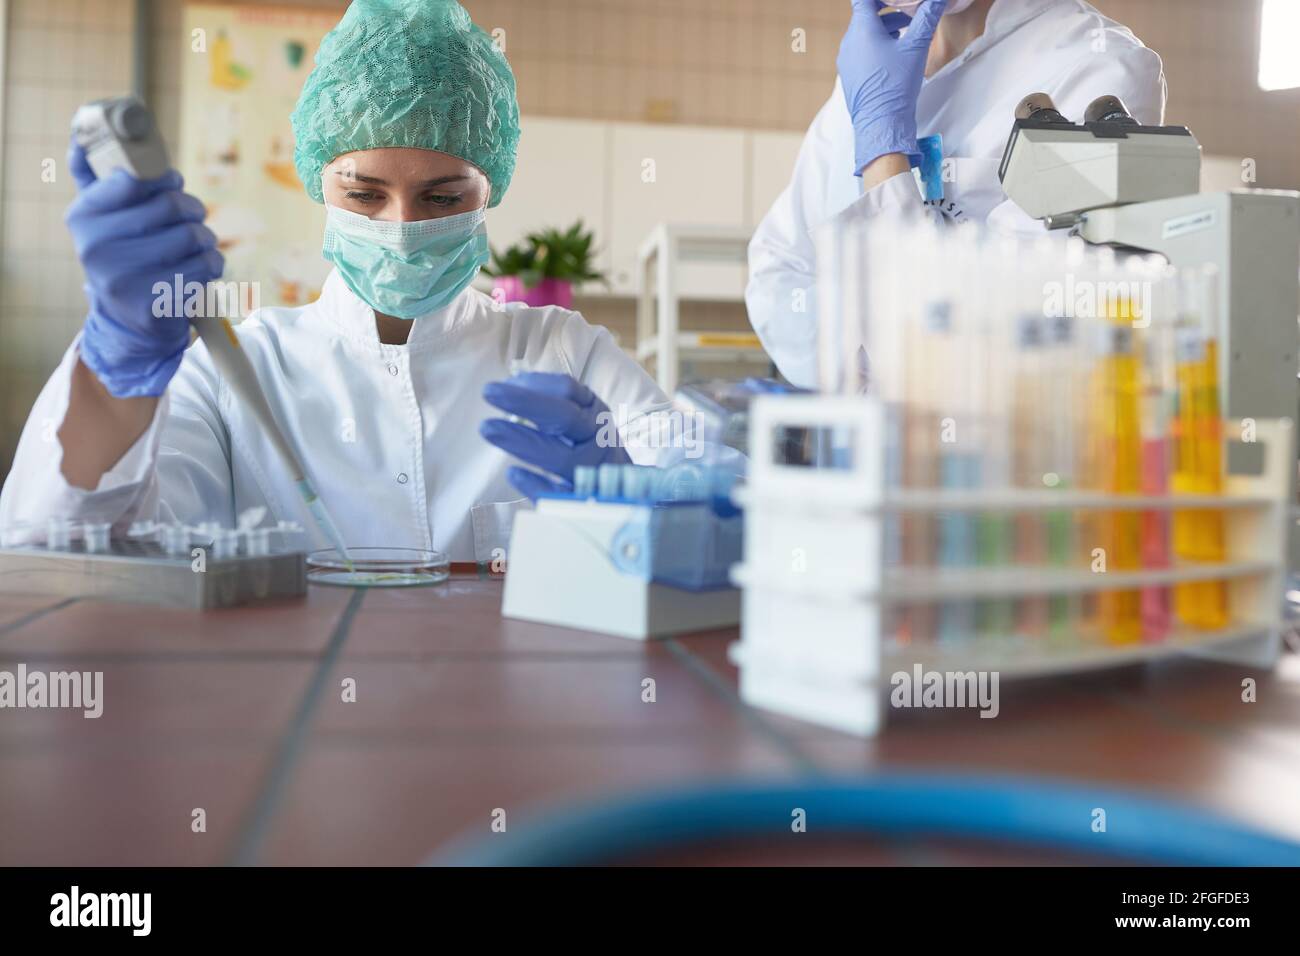 Young female scientists in protective gear carefully working with chemicals in a sterile laboratory environment. Science, chemistry, lab, people Stock Photo